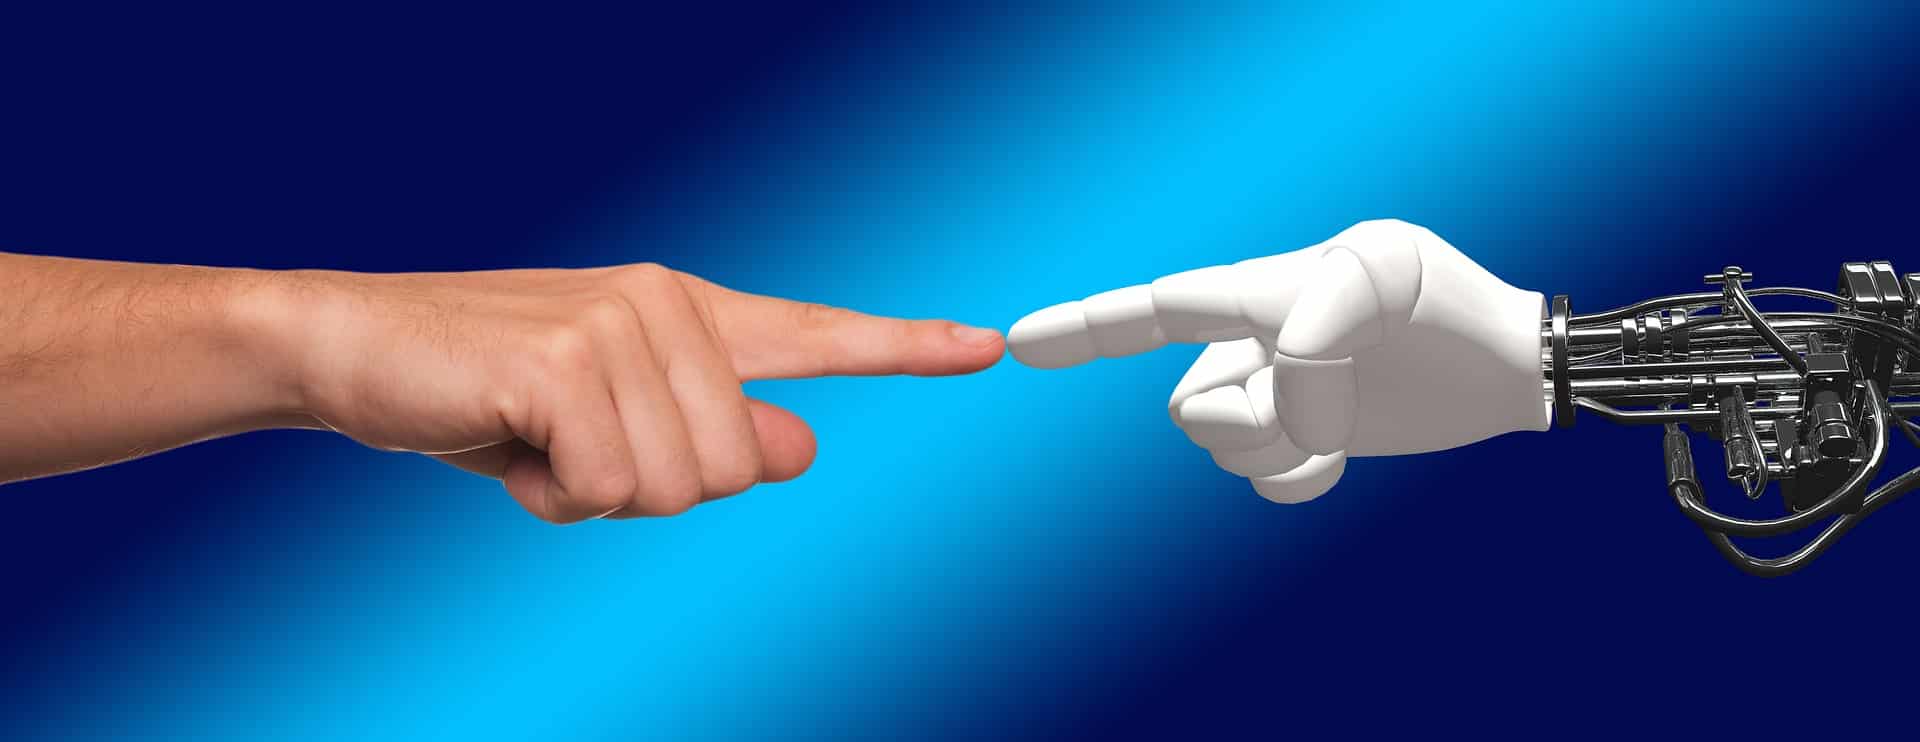 Technology can’t replace the human touch